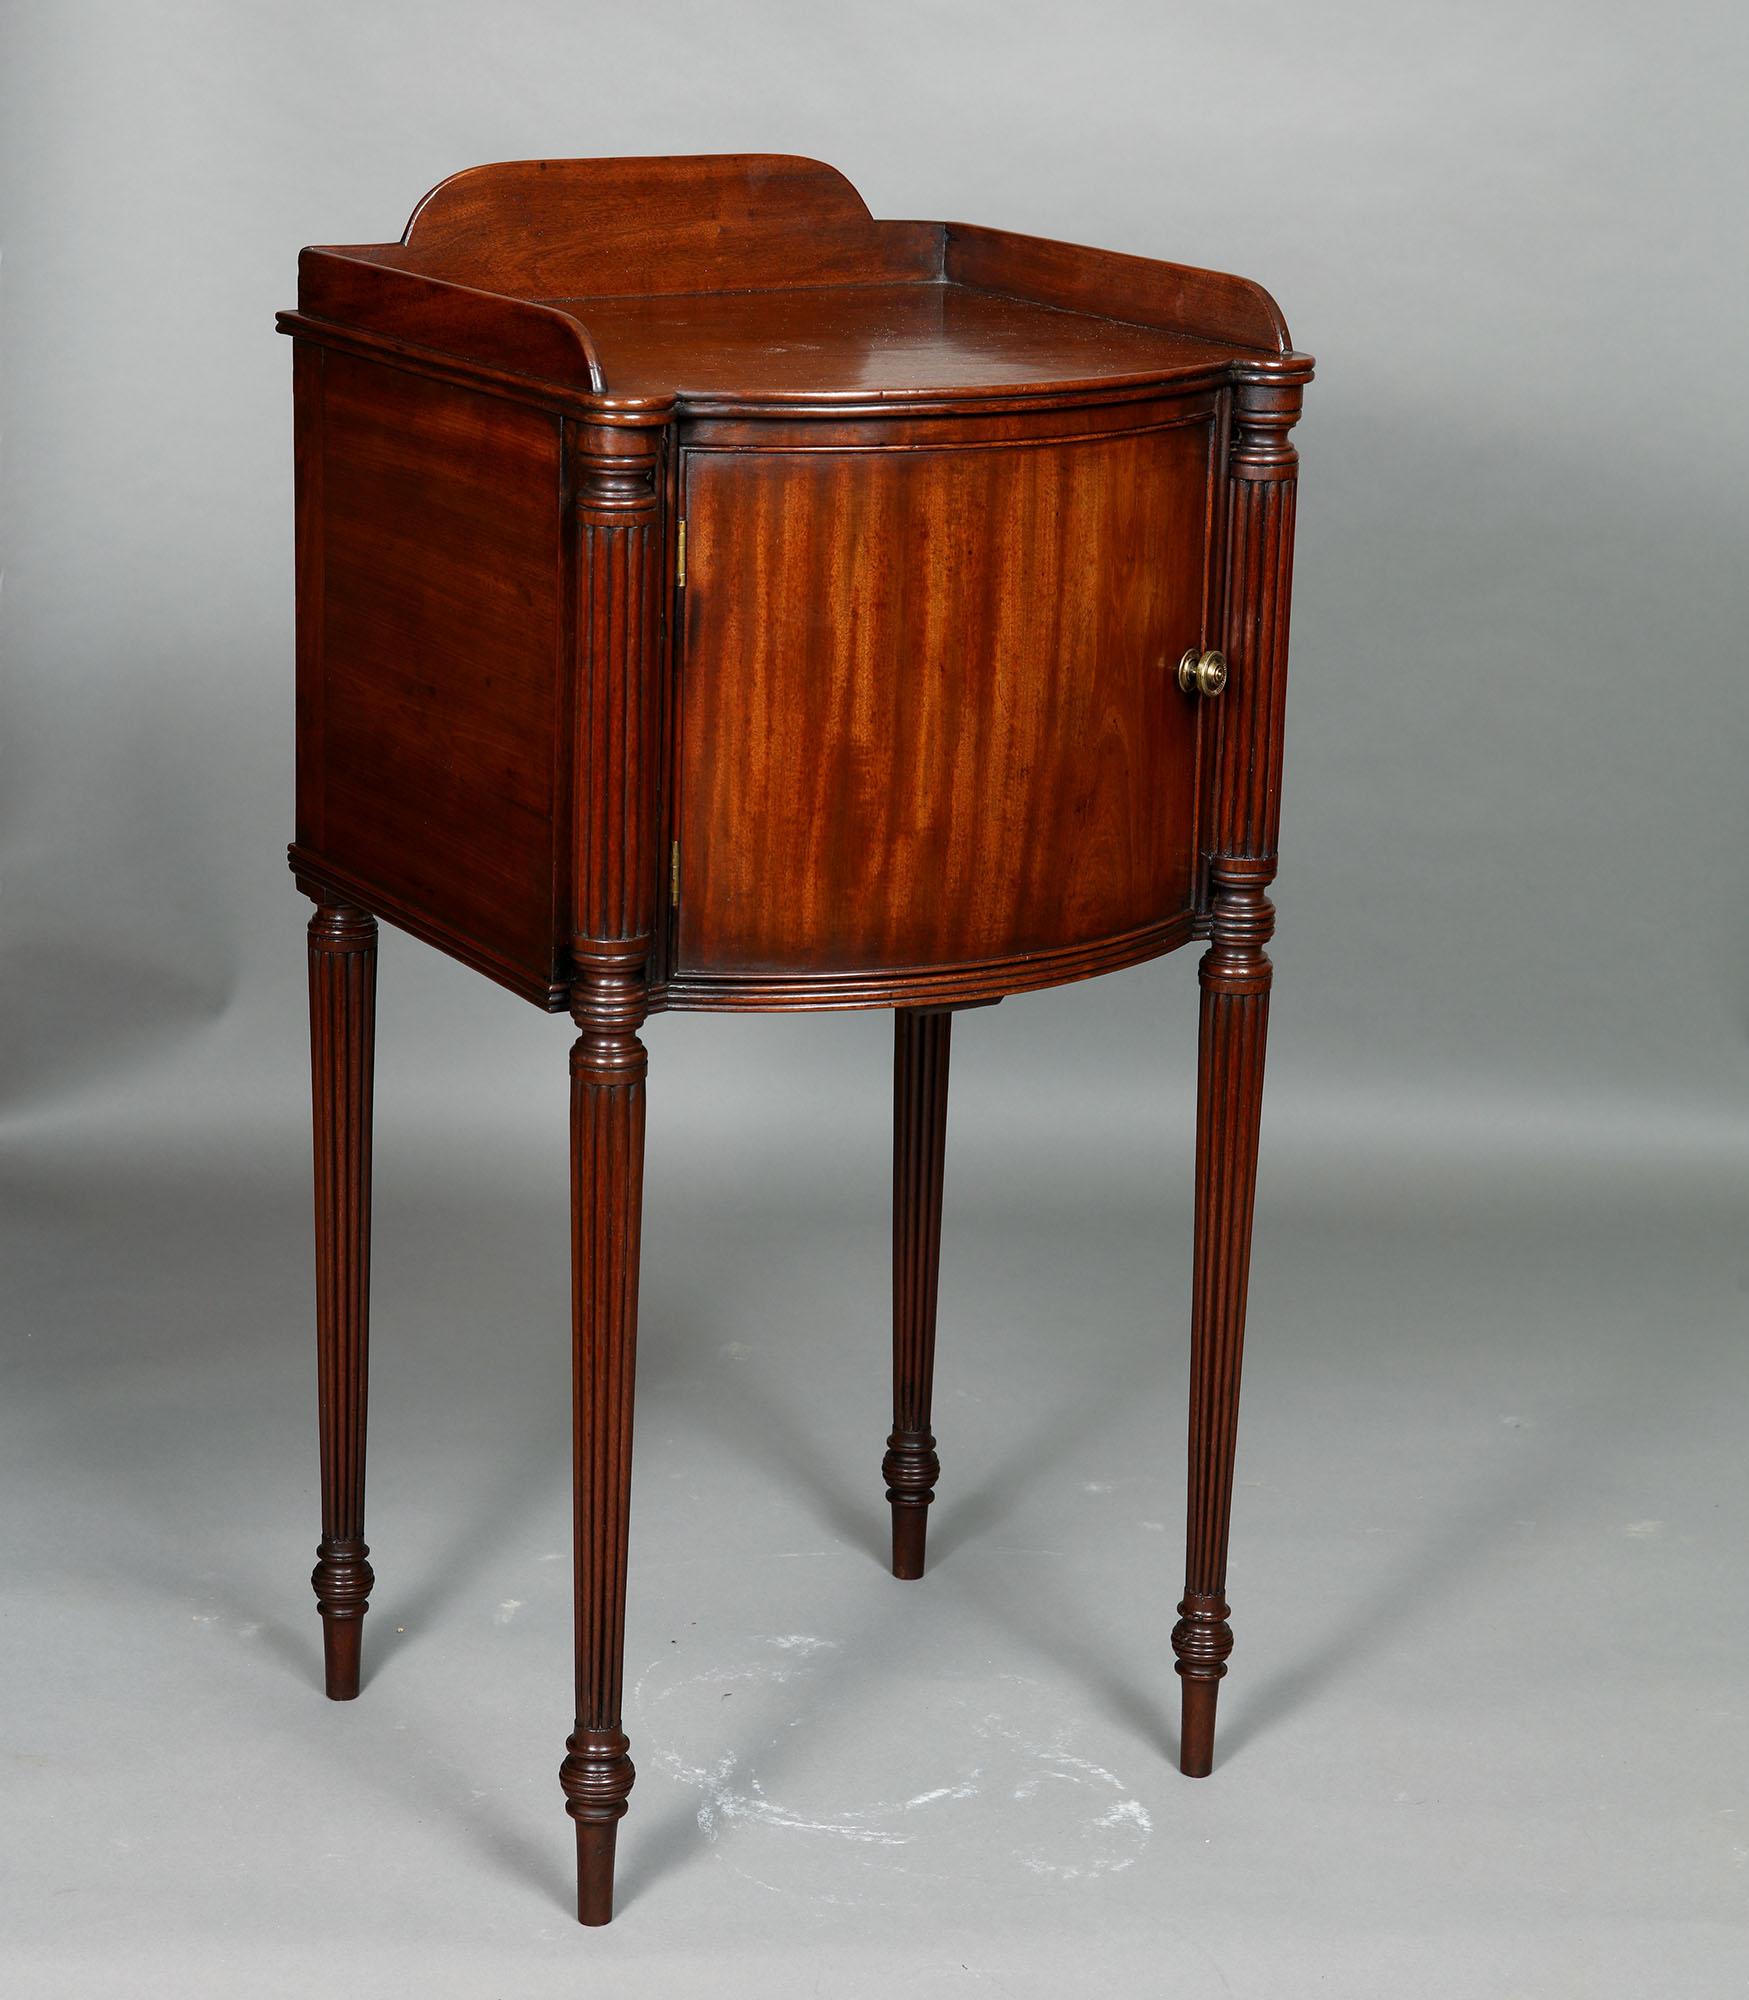 Pair of George III Mahogany Bedside Cabinet Nightstands Manner of Gillows In Good Condition For Sale In London, by appointment only